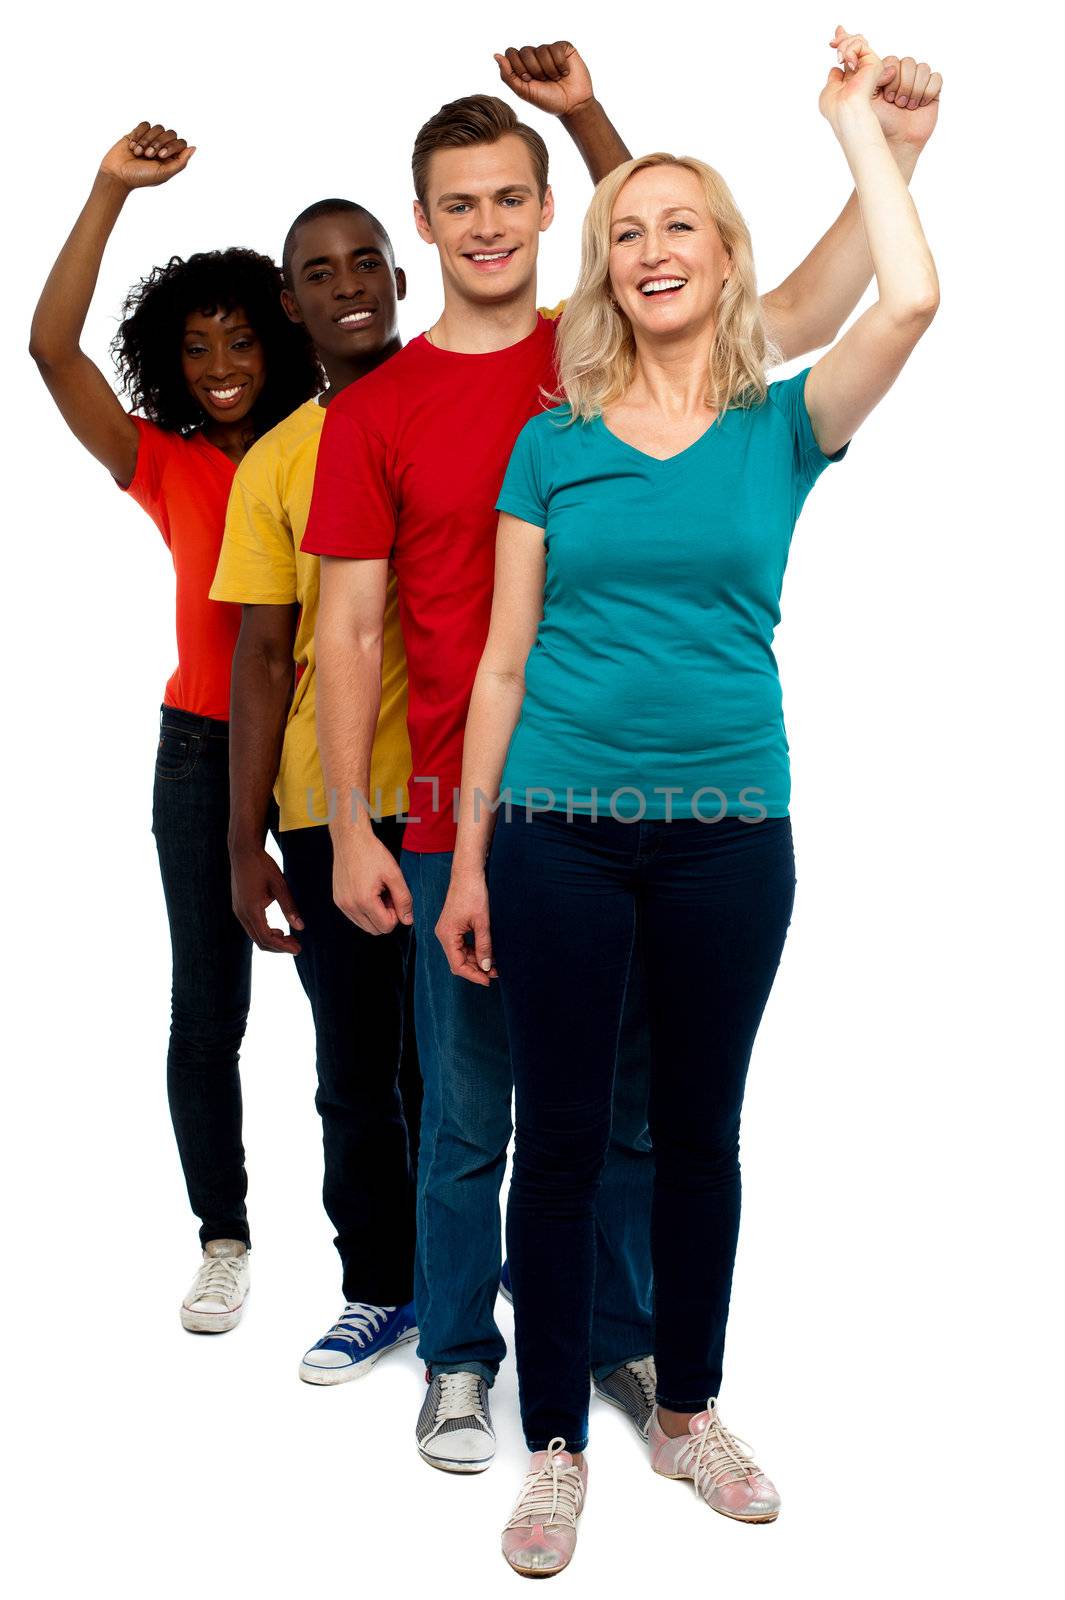 Excited group of cheerful people, full length shot over white background